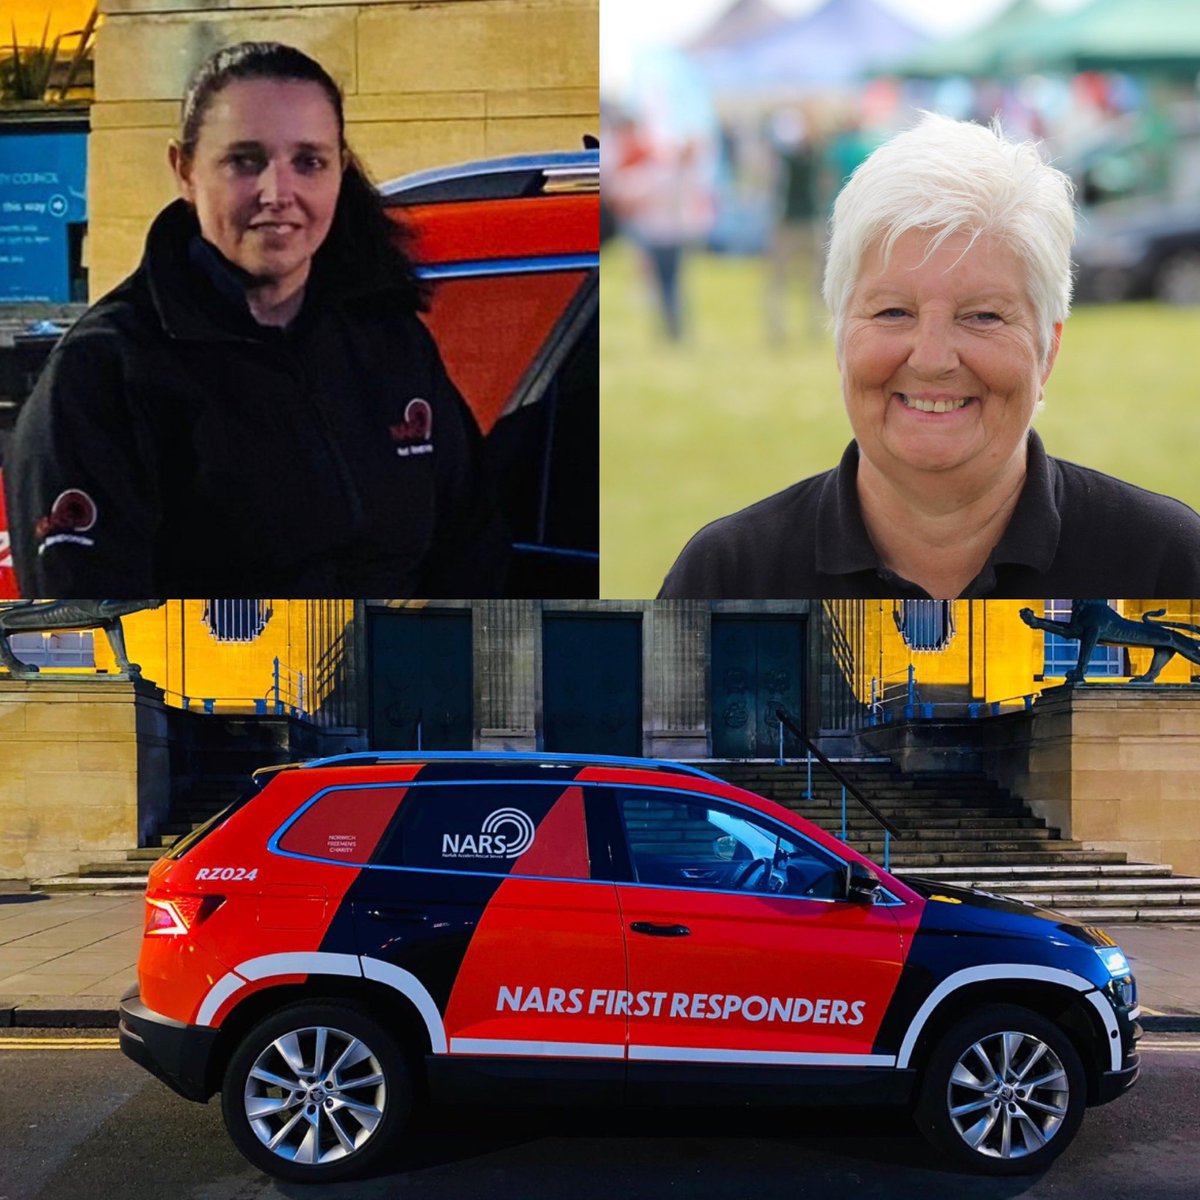 Tonight we have NARS First Responders @SmithsonKaren & Pat out on shift providing cover where needed. Karen’s full time job is a director of a global event marketing company and also is an Emergency Medical Technician with @EastEnglandAmb and Pat runs a small holdings farm